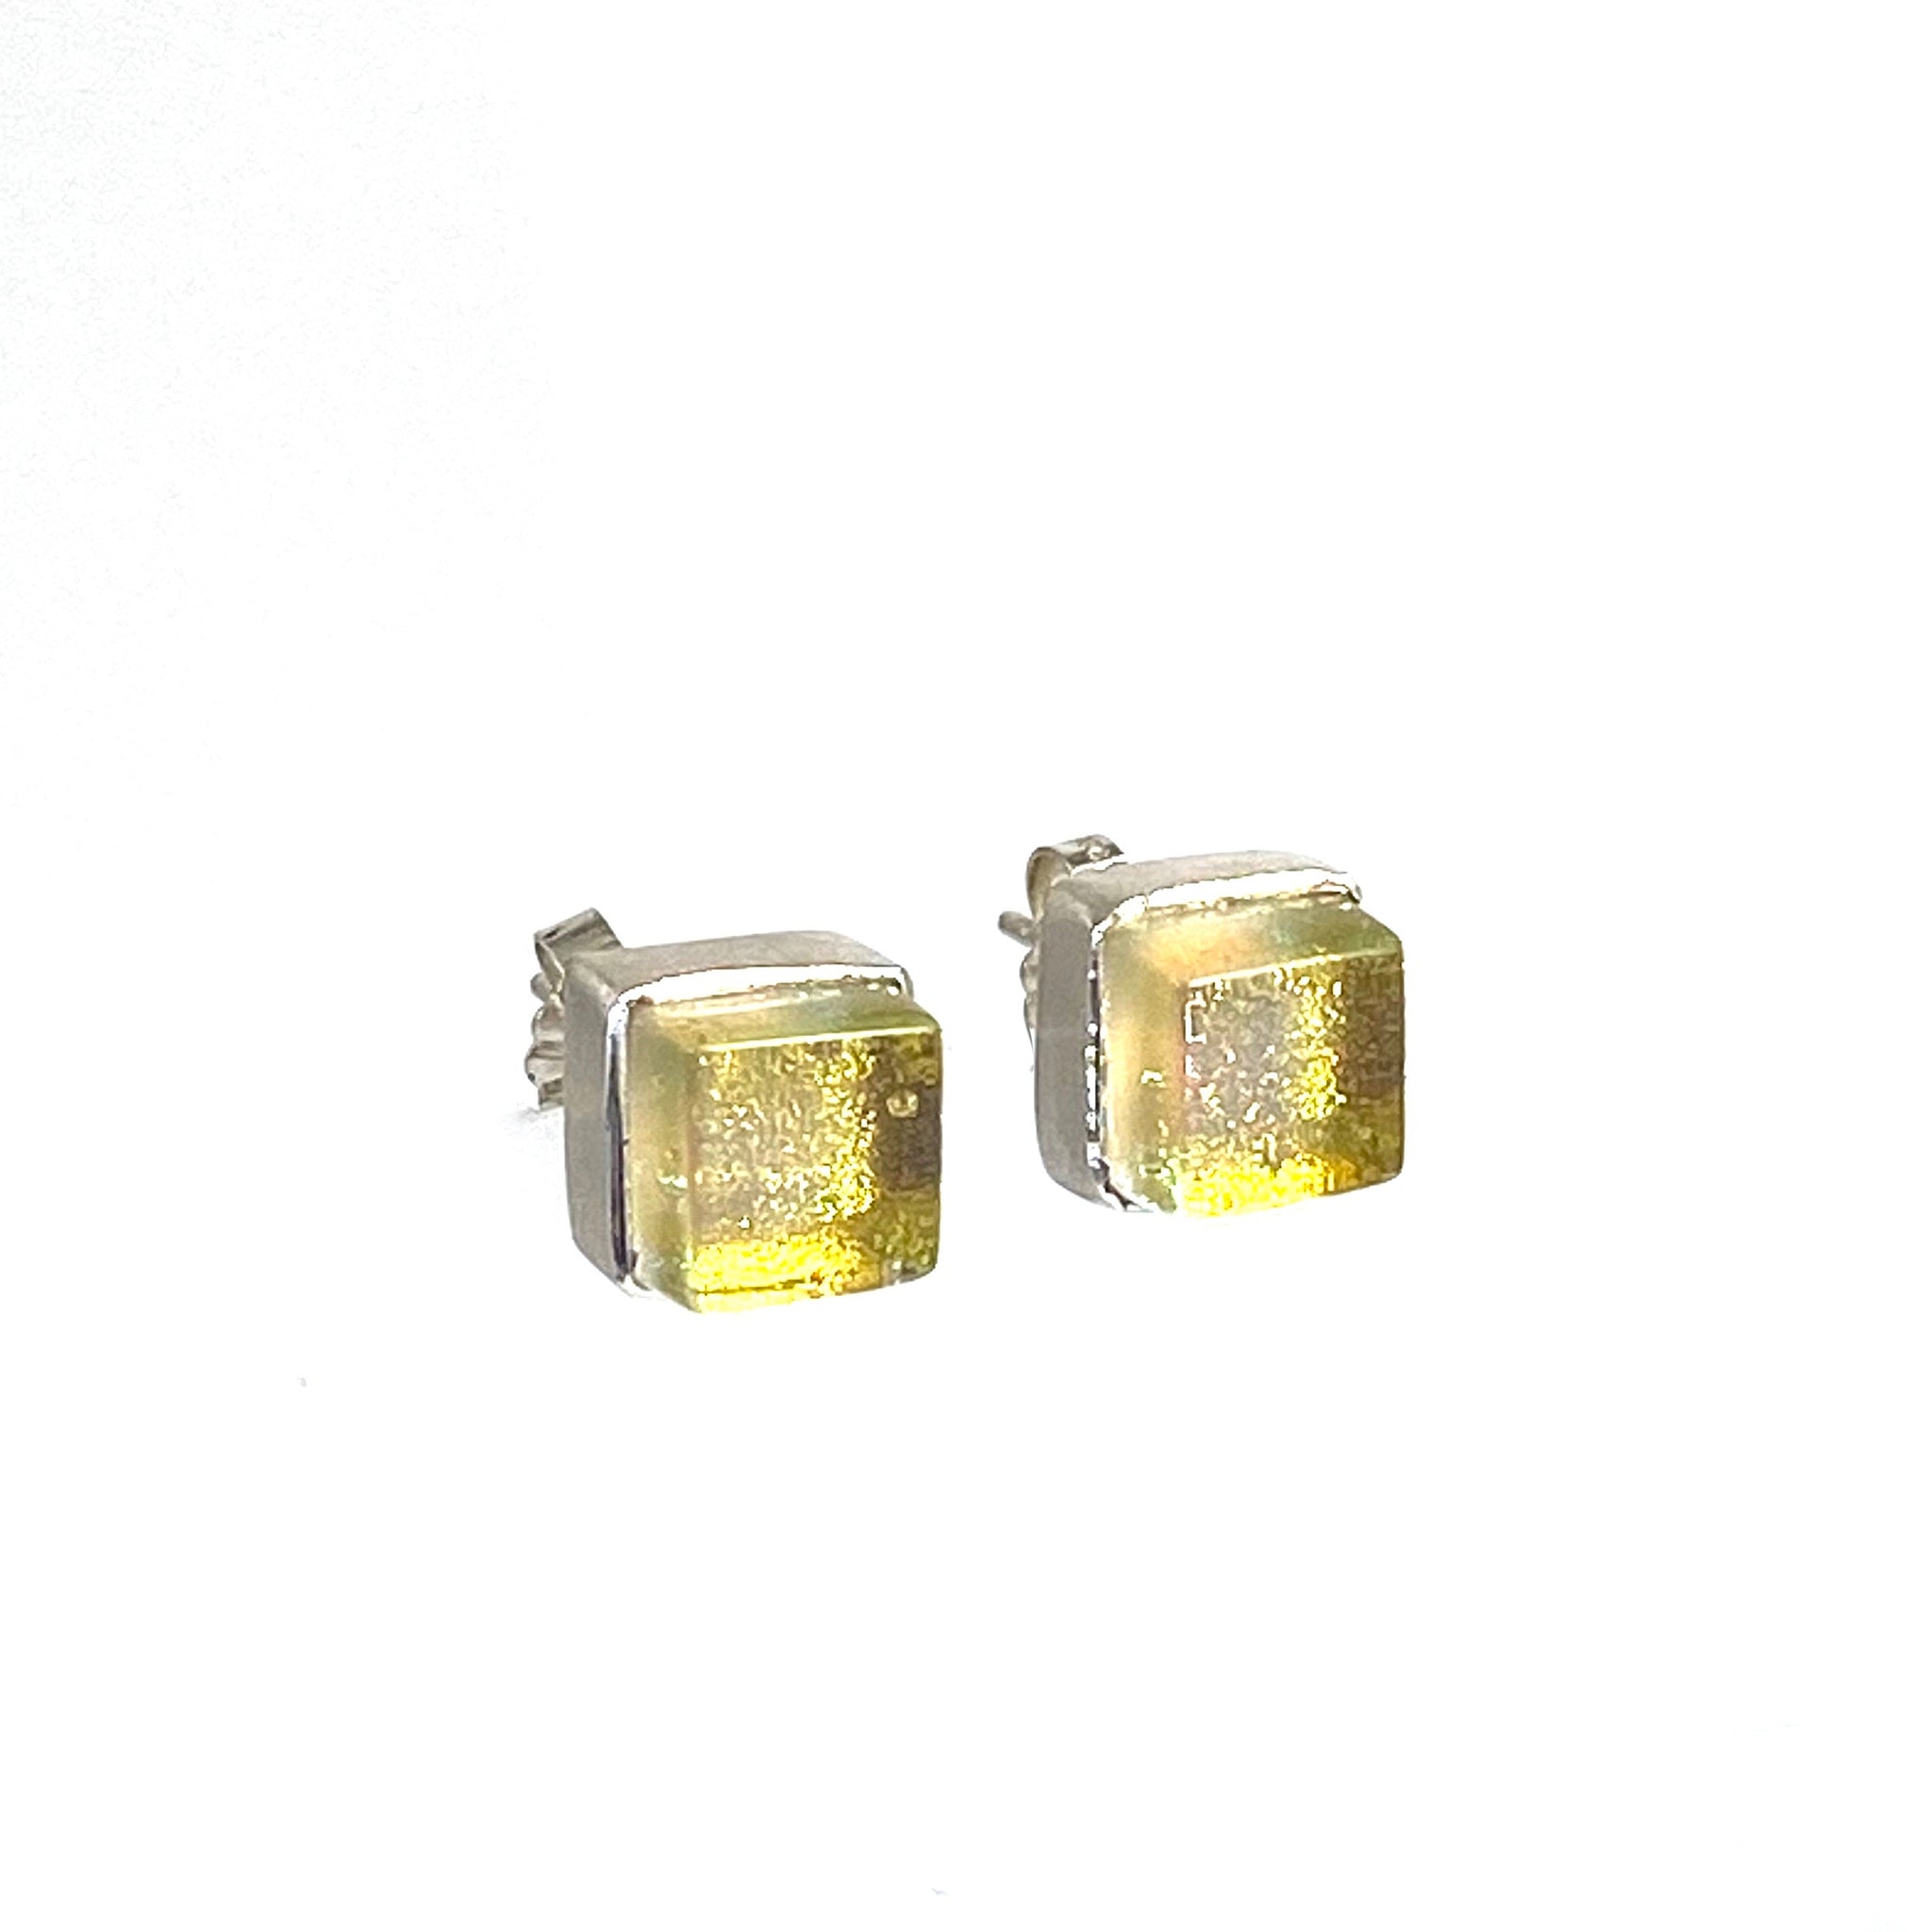 champagne, yellow, square earrings, fused glass, glass jewelry, glass and silver jewelry, handmade, handcrafted, American Craft, hand fabricated jewelry, hand fabricated jewellery,  Athen, Georgia, colorful jewelry, sparkle, bullseye glass, dichroic glass, art jewelry